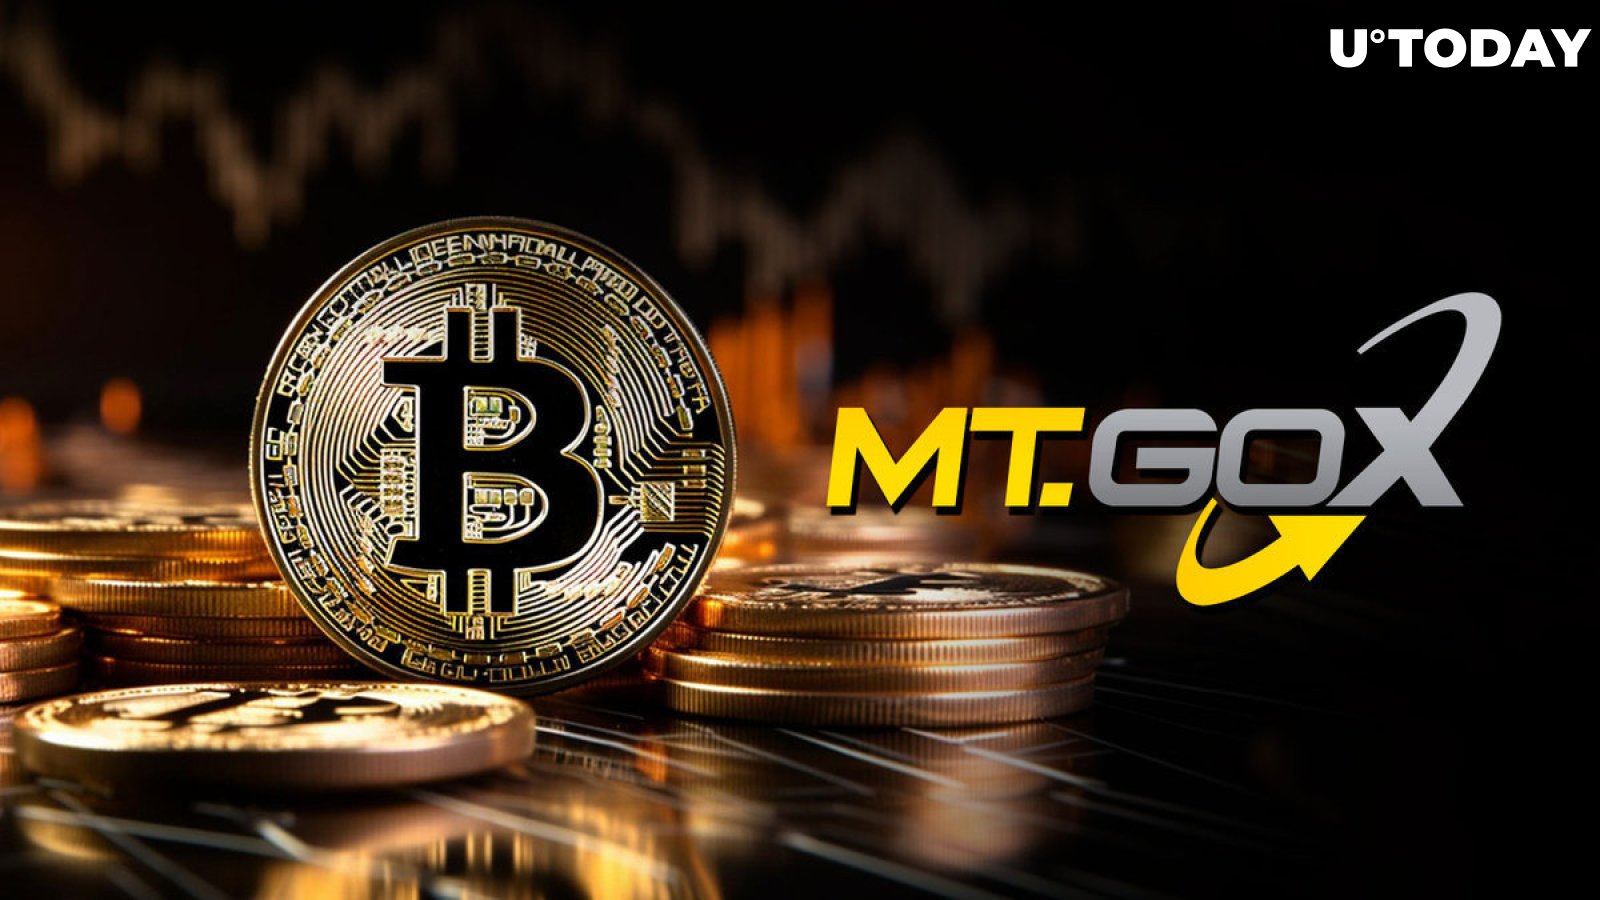 Bitcoin Price Yields to Mt Gox Giant Transactions with Sudden Fall